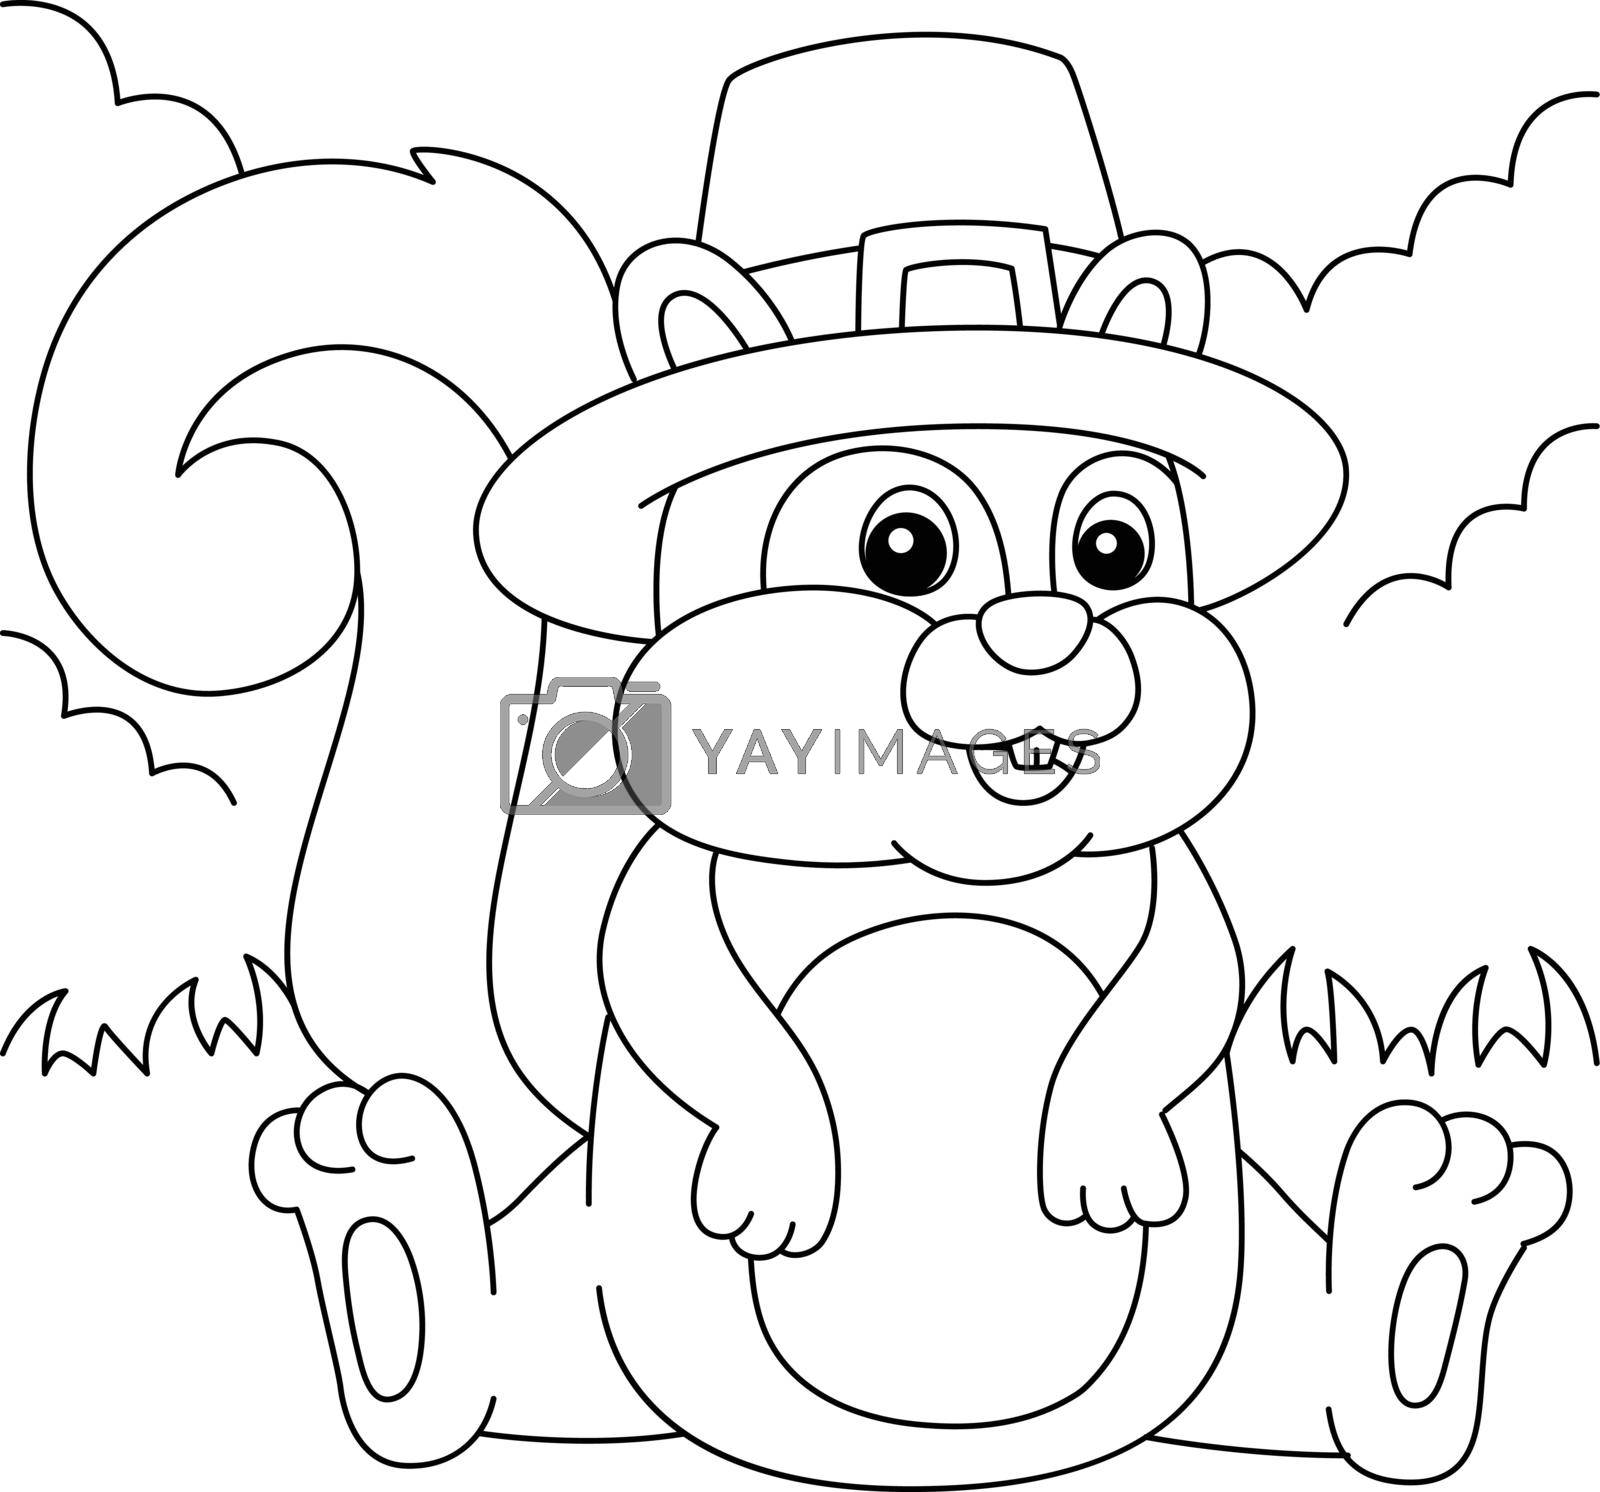 Royalty free image of Thanksgiving Squirrel Pilgrim Hat Coloring Page by abbydesign